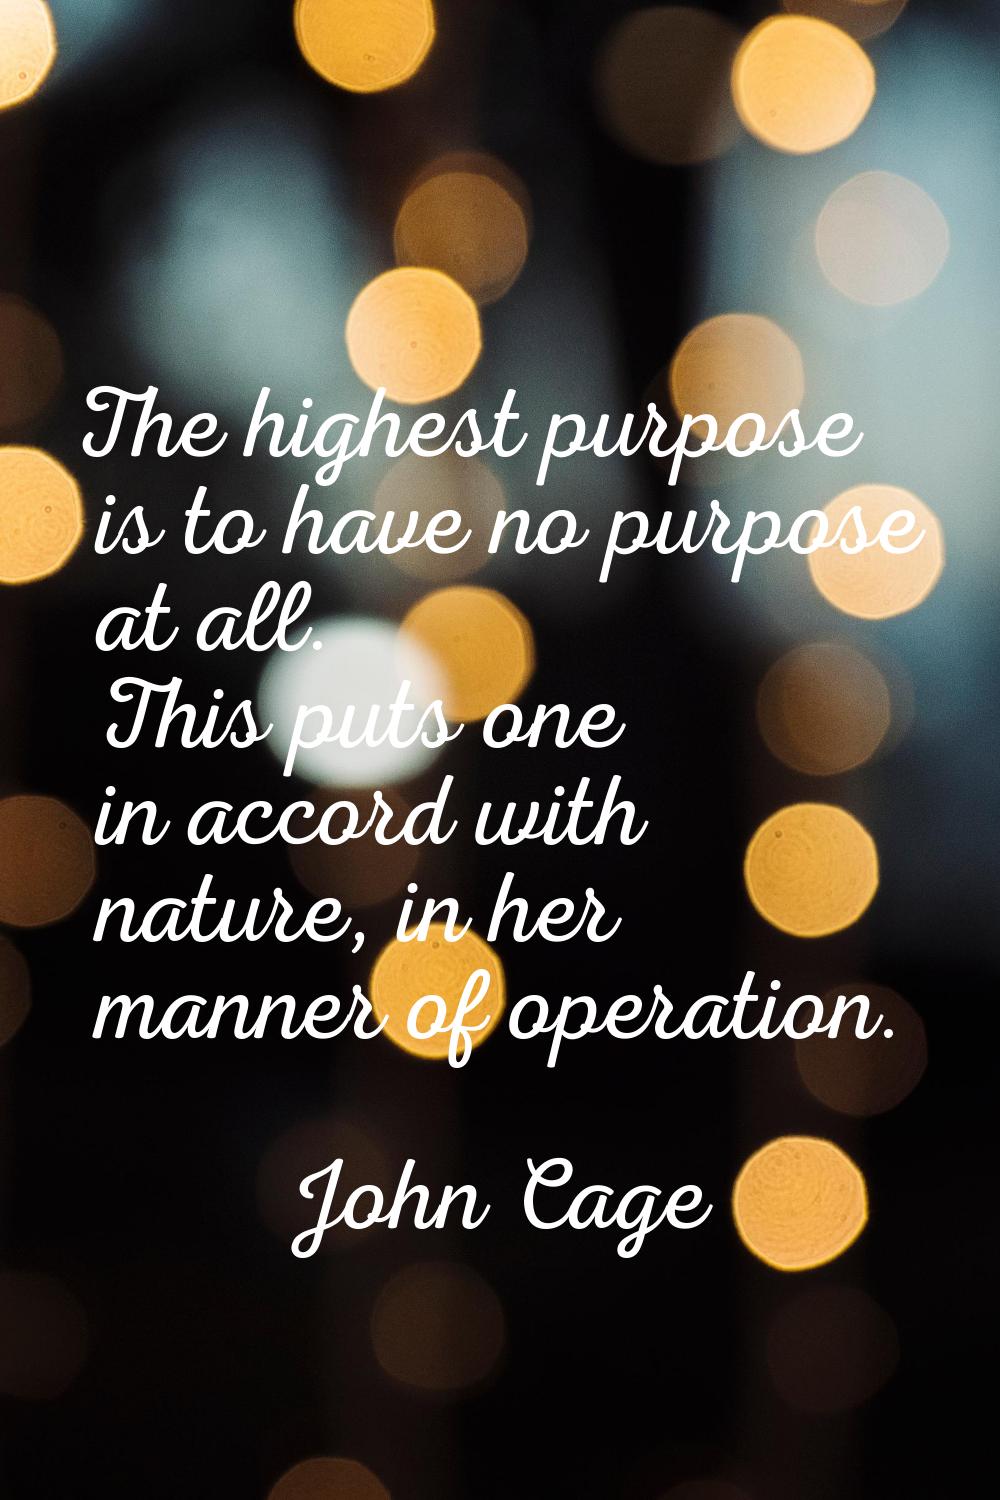 The highest purpose is to have no purpose at all. This puts one in accord with nature, in her manne